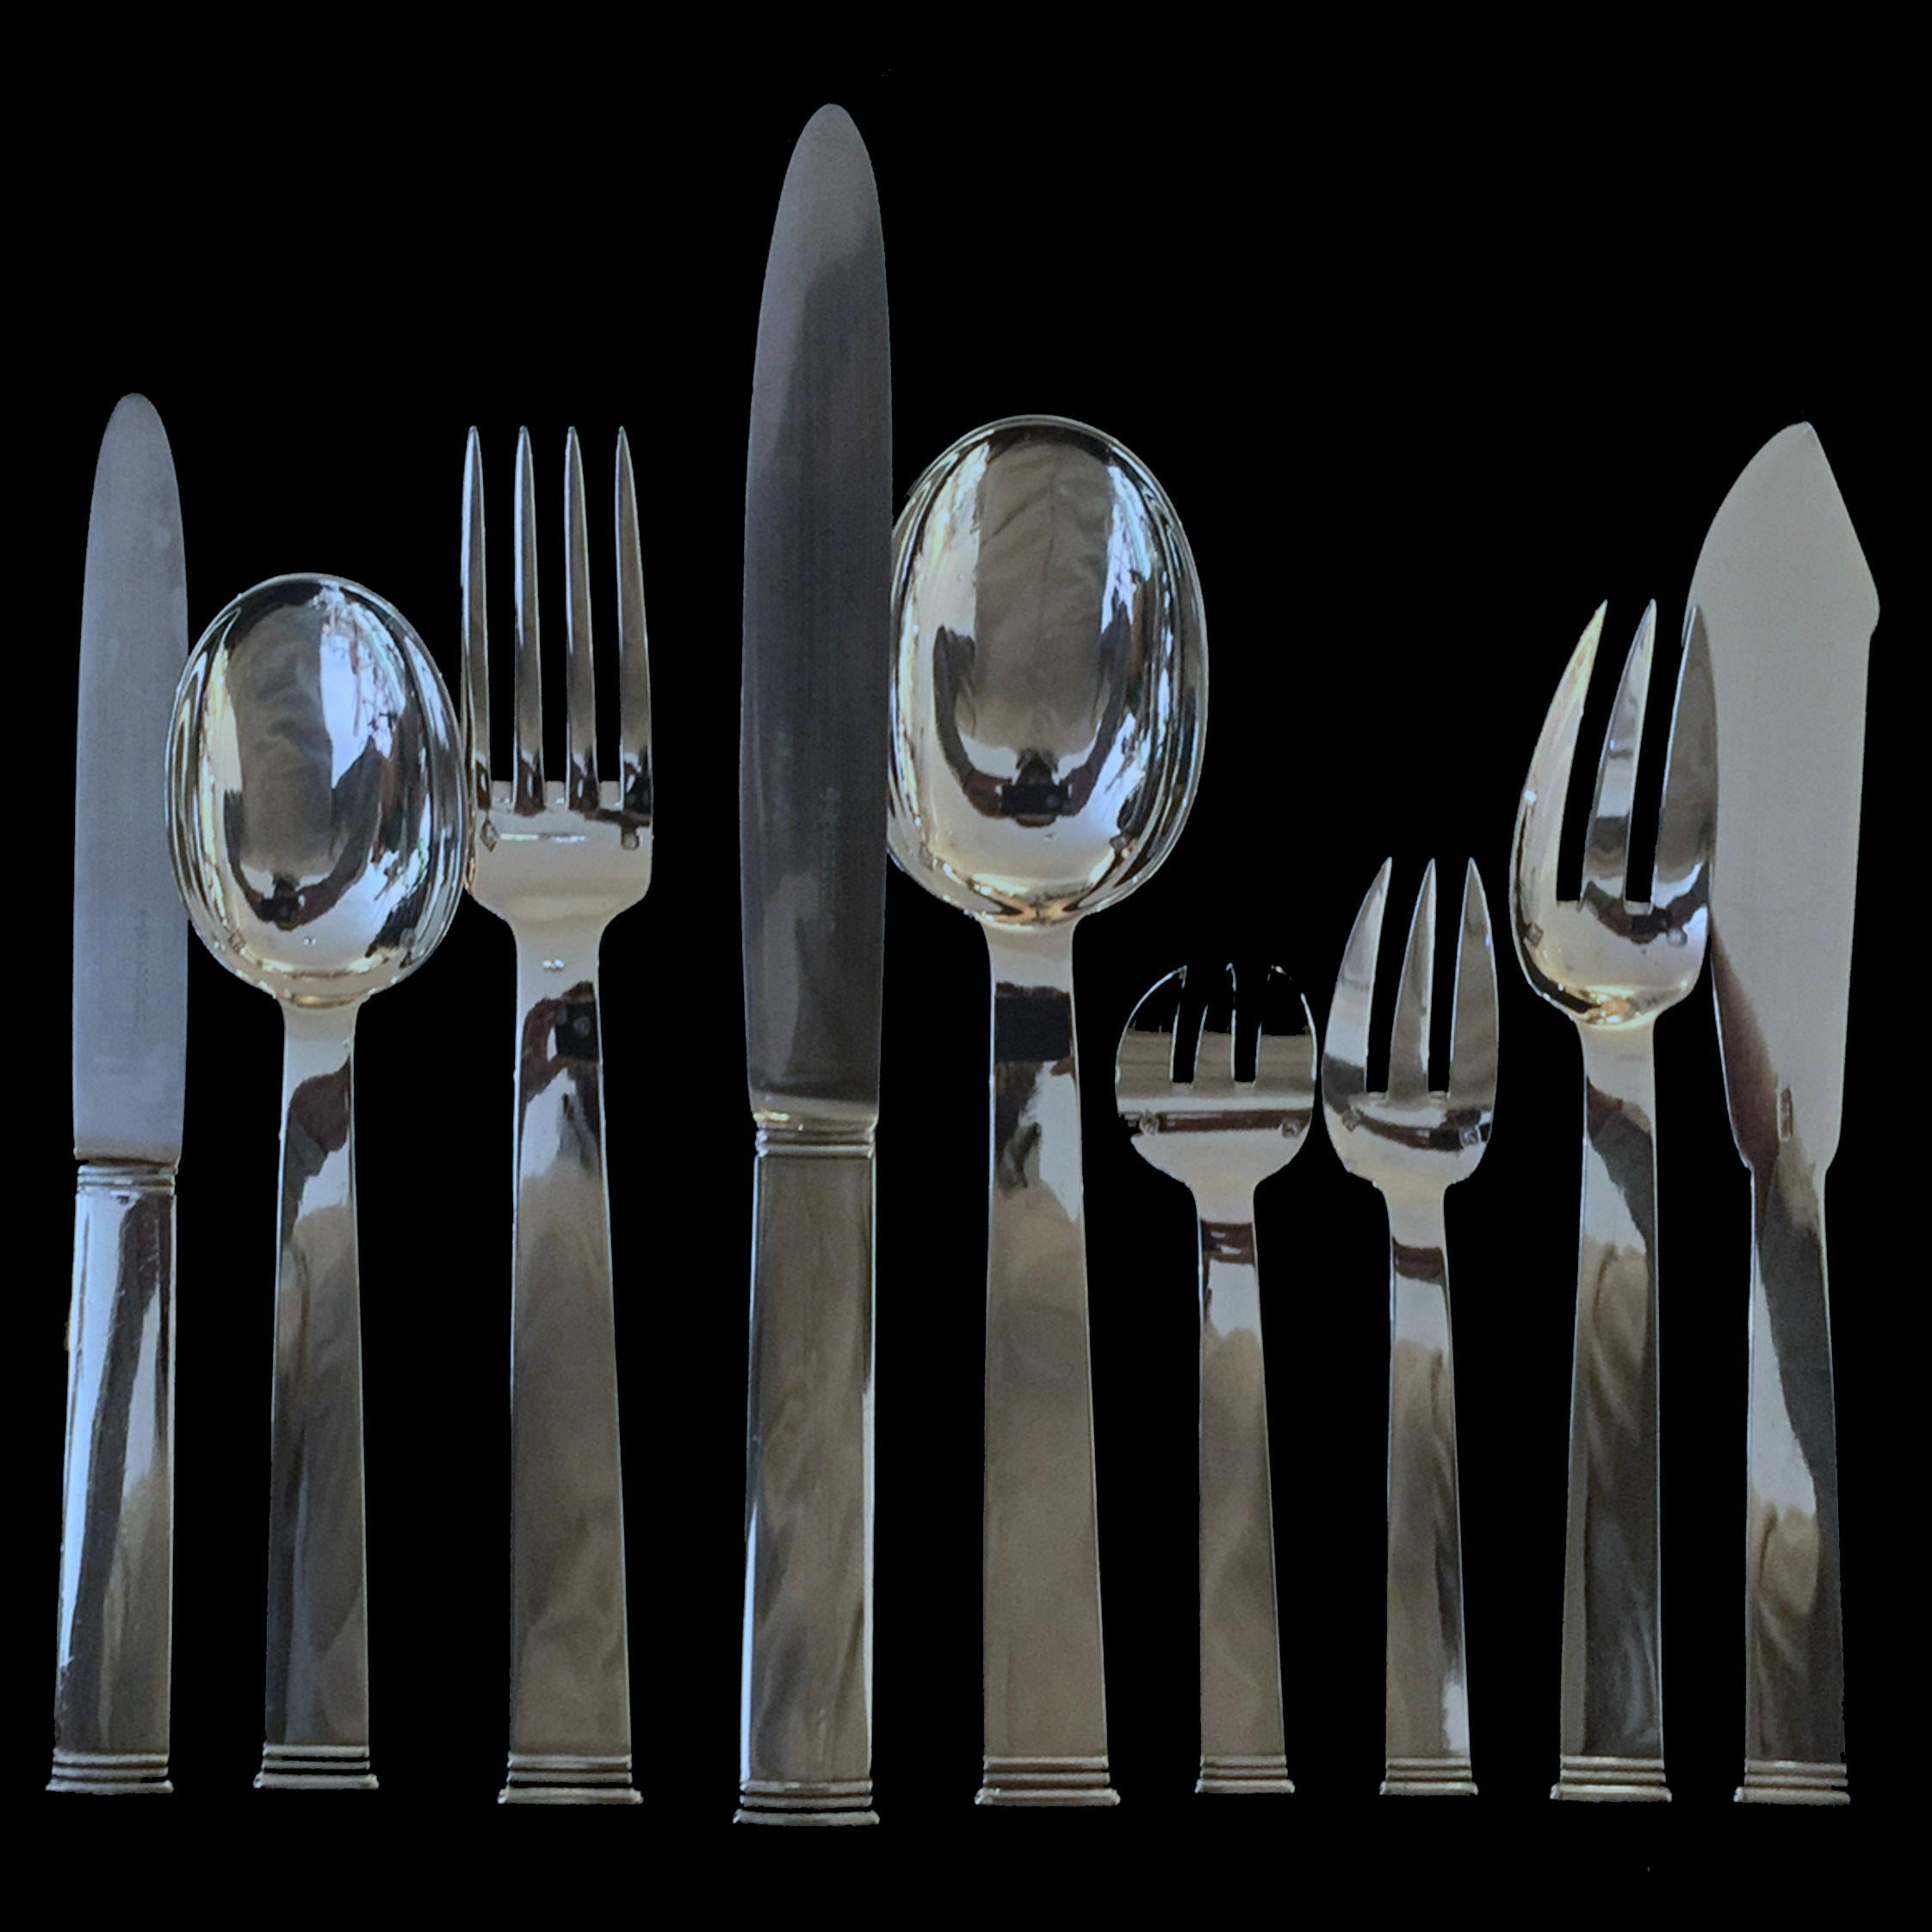 This sterling silver cutlery set Commodore pattern created by Jacques and Pierre Cardeilhac silversmiths contains 355 pieces :
24 large tablespoons
42 large table forks
35 large table knives
18 dessert spoons
36 dessert forks 
36 small knives
18